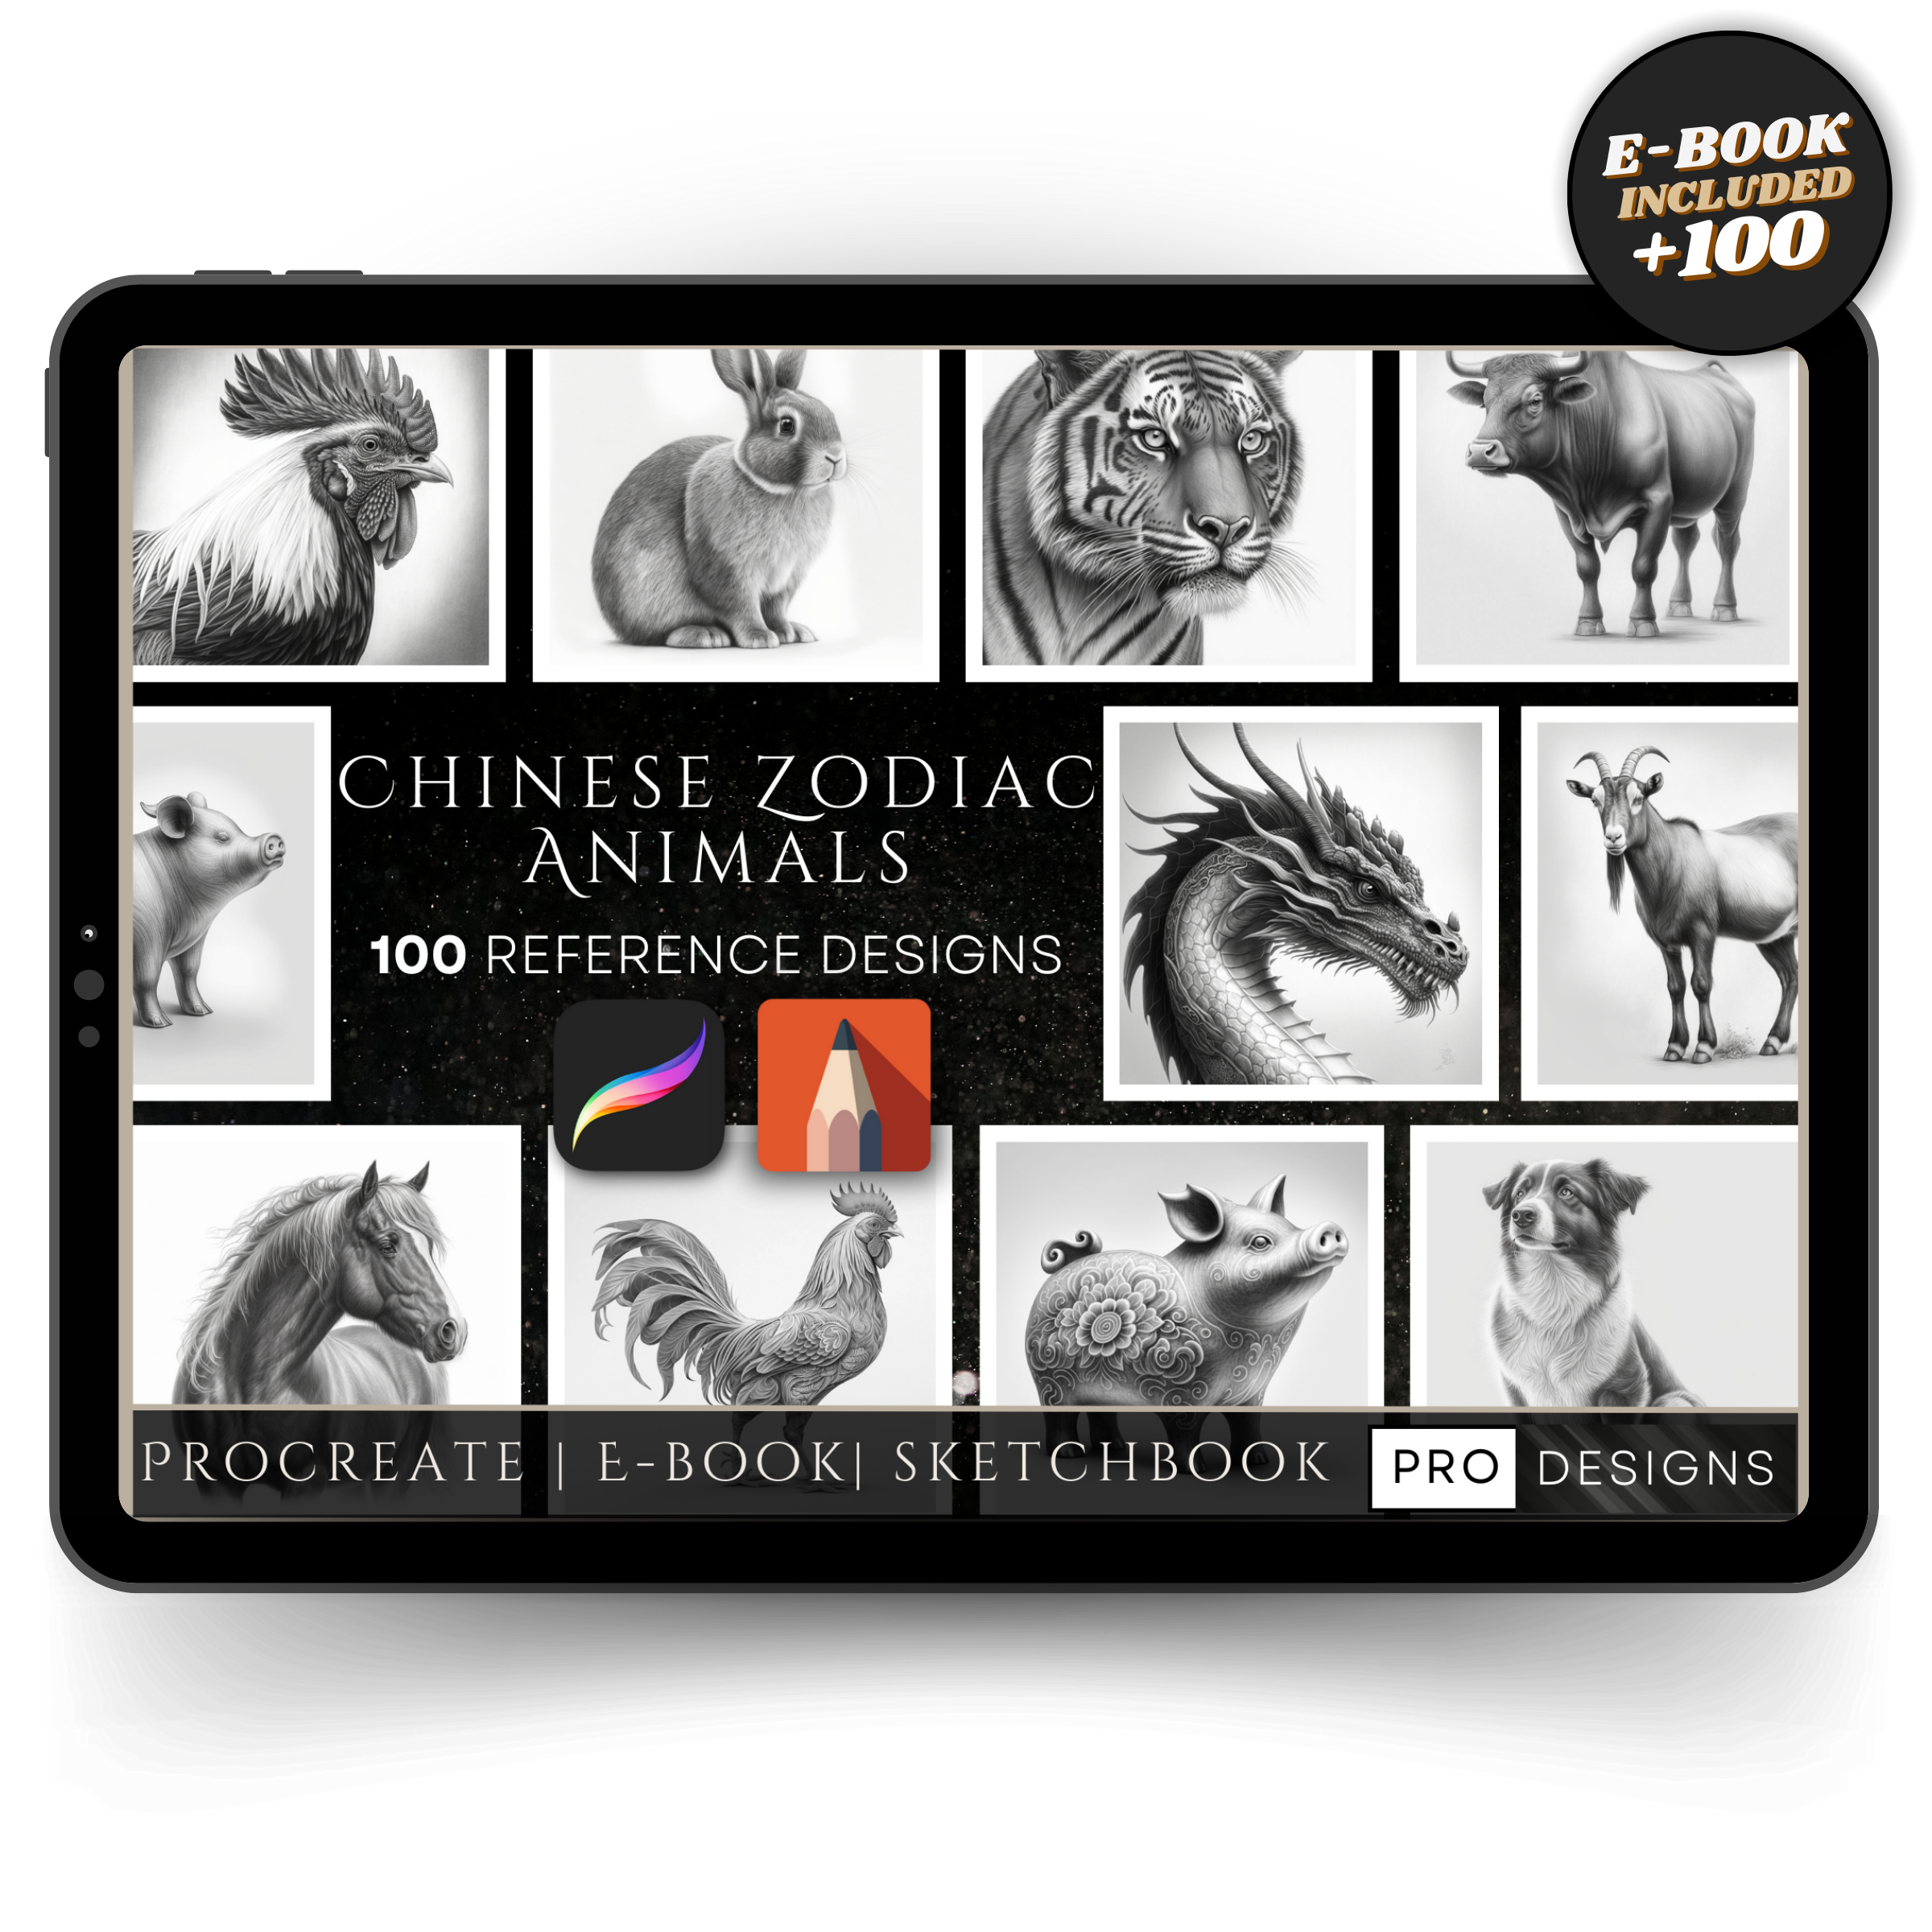 "Chinese Zodiac Animals" - Embrace the Mystique of Ancient Astrology